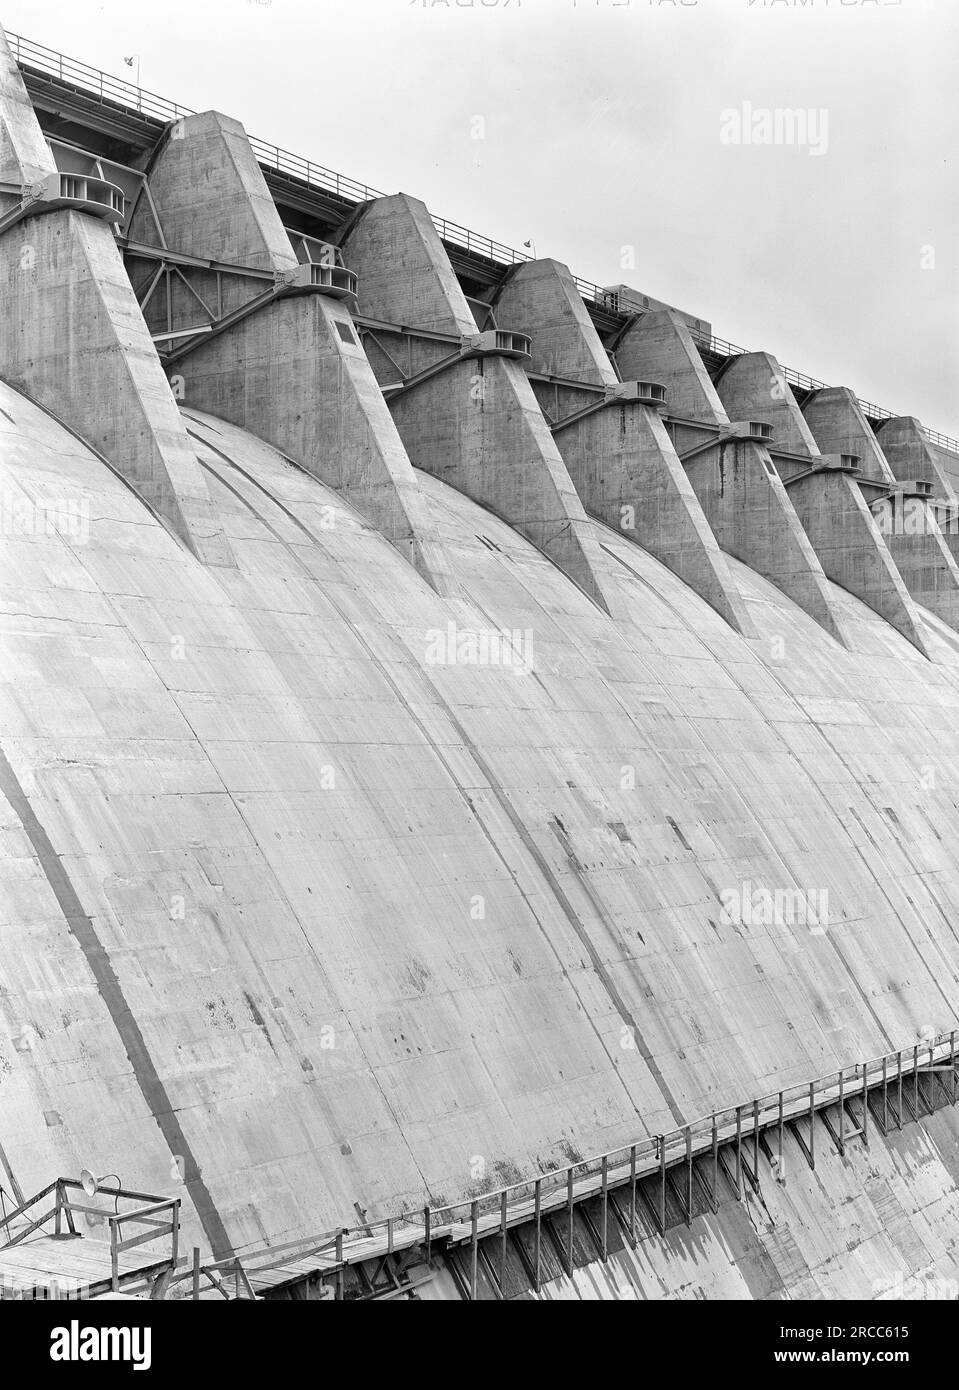 Cherokee Dam spillway, Tennessee Valley Authority, Jefferson County, Tennessee, USA, Arthur Rothstein, U.S. Farm Security Administration, June 1942 Stock Photo